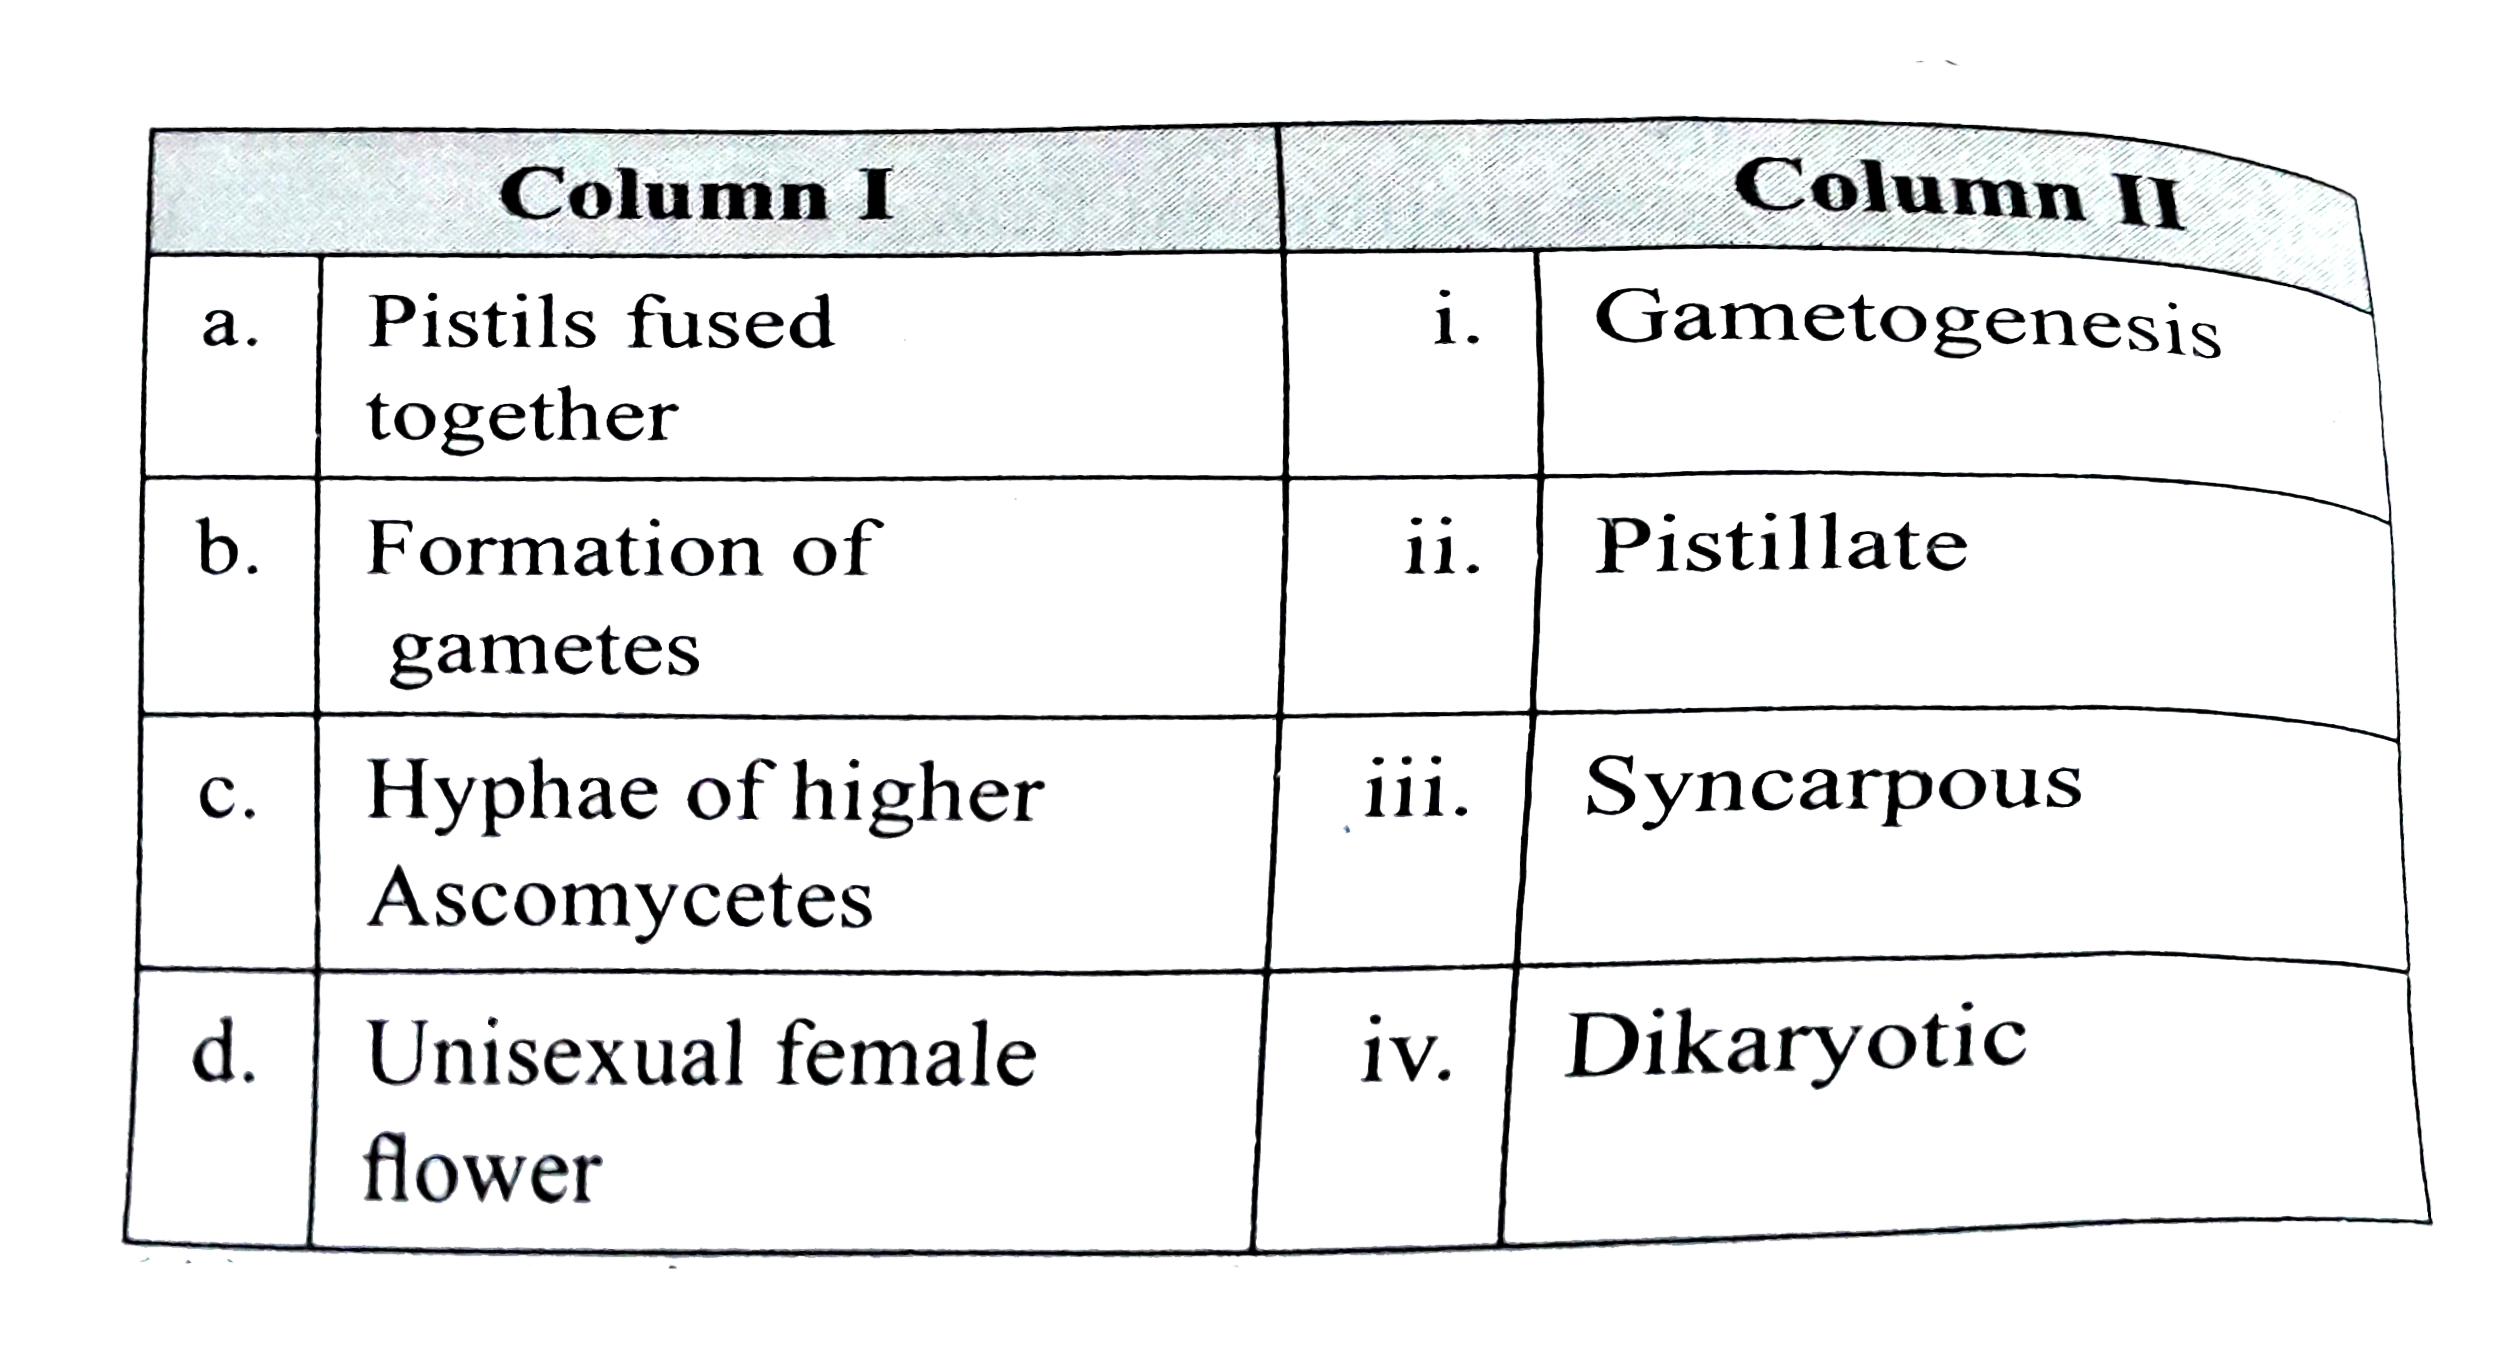 Match the Column I and Column II and select the correct option using the codes given below